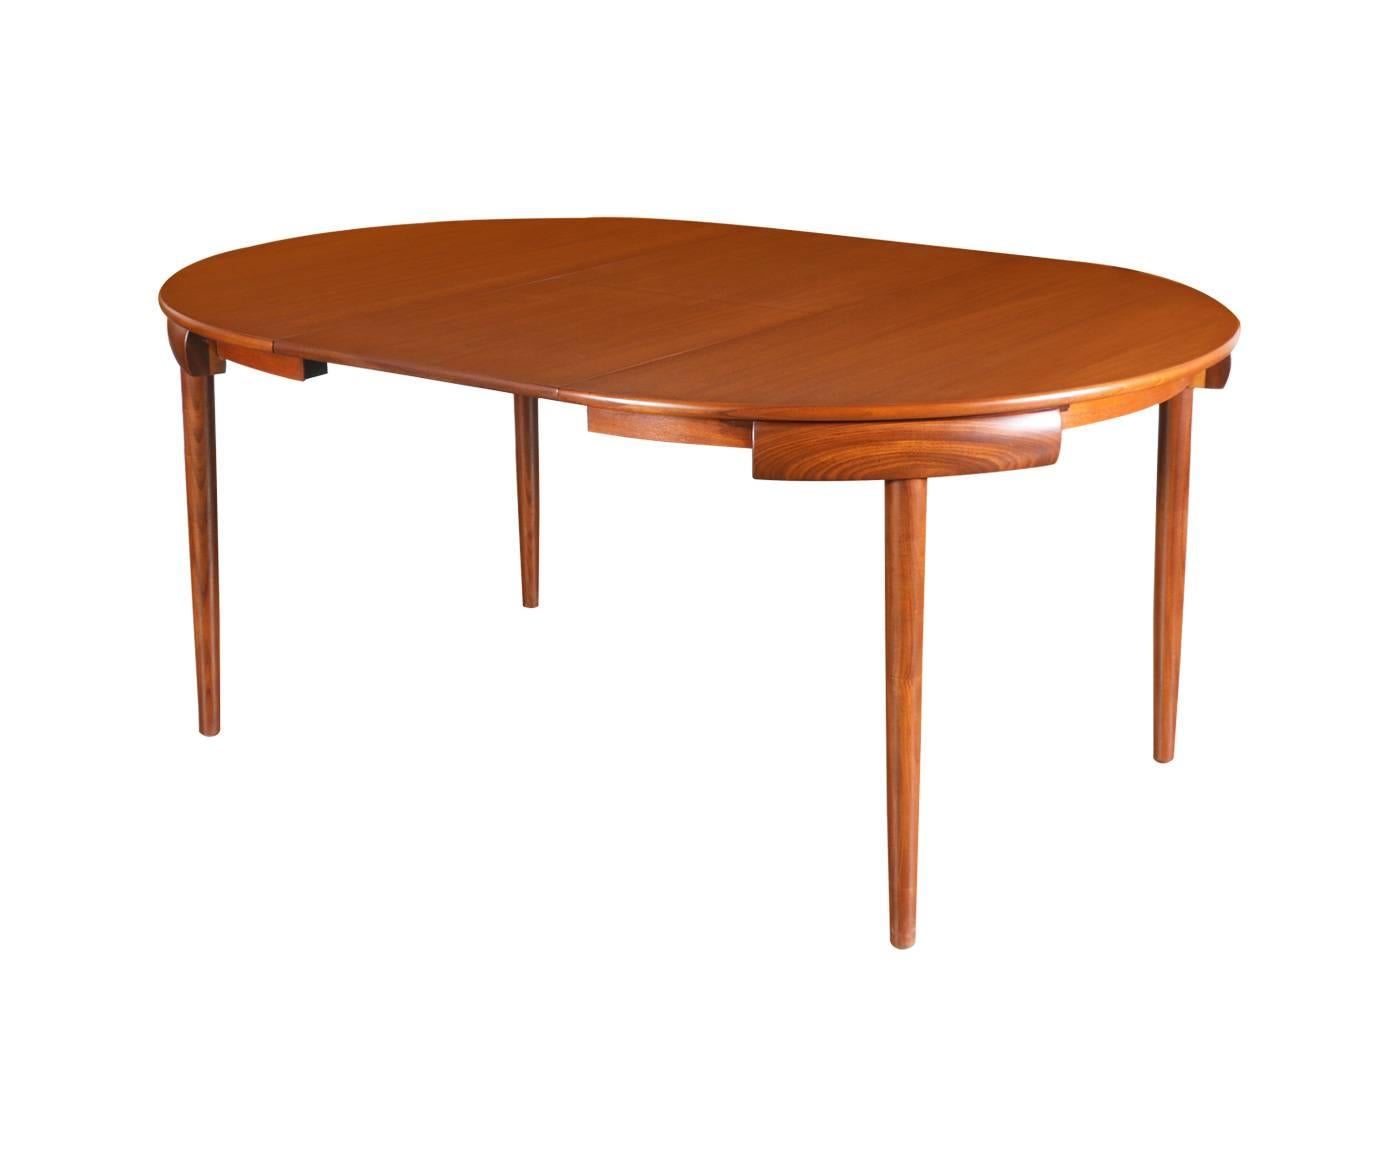 Designer: Hans Olsen
Manufacturer: Frem Røjle Møbelfabrik
Period/Style: Danish Modern
Country: Denmark
Date: 1950s

Dimensions: Table 29.25″H x 47.25″W
Extension Leaf 67.25″
Chairs 28.25″H x 18.5″W x 16″D
Seat Height 17.5″H
Materials: